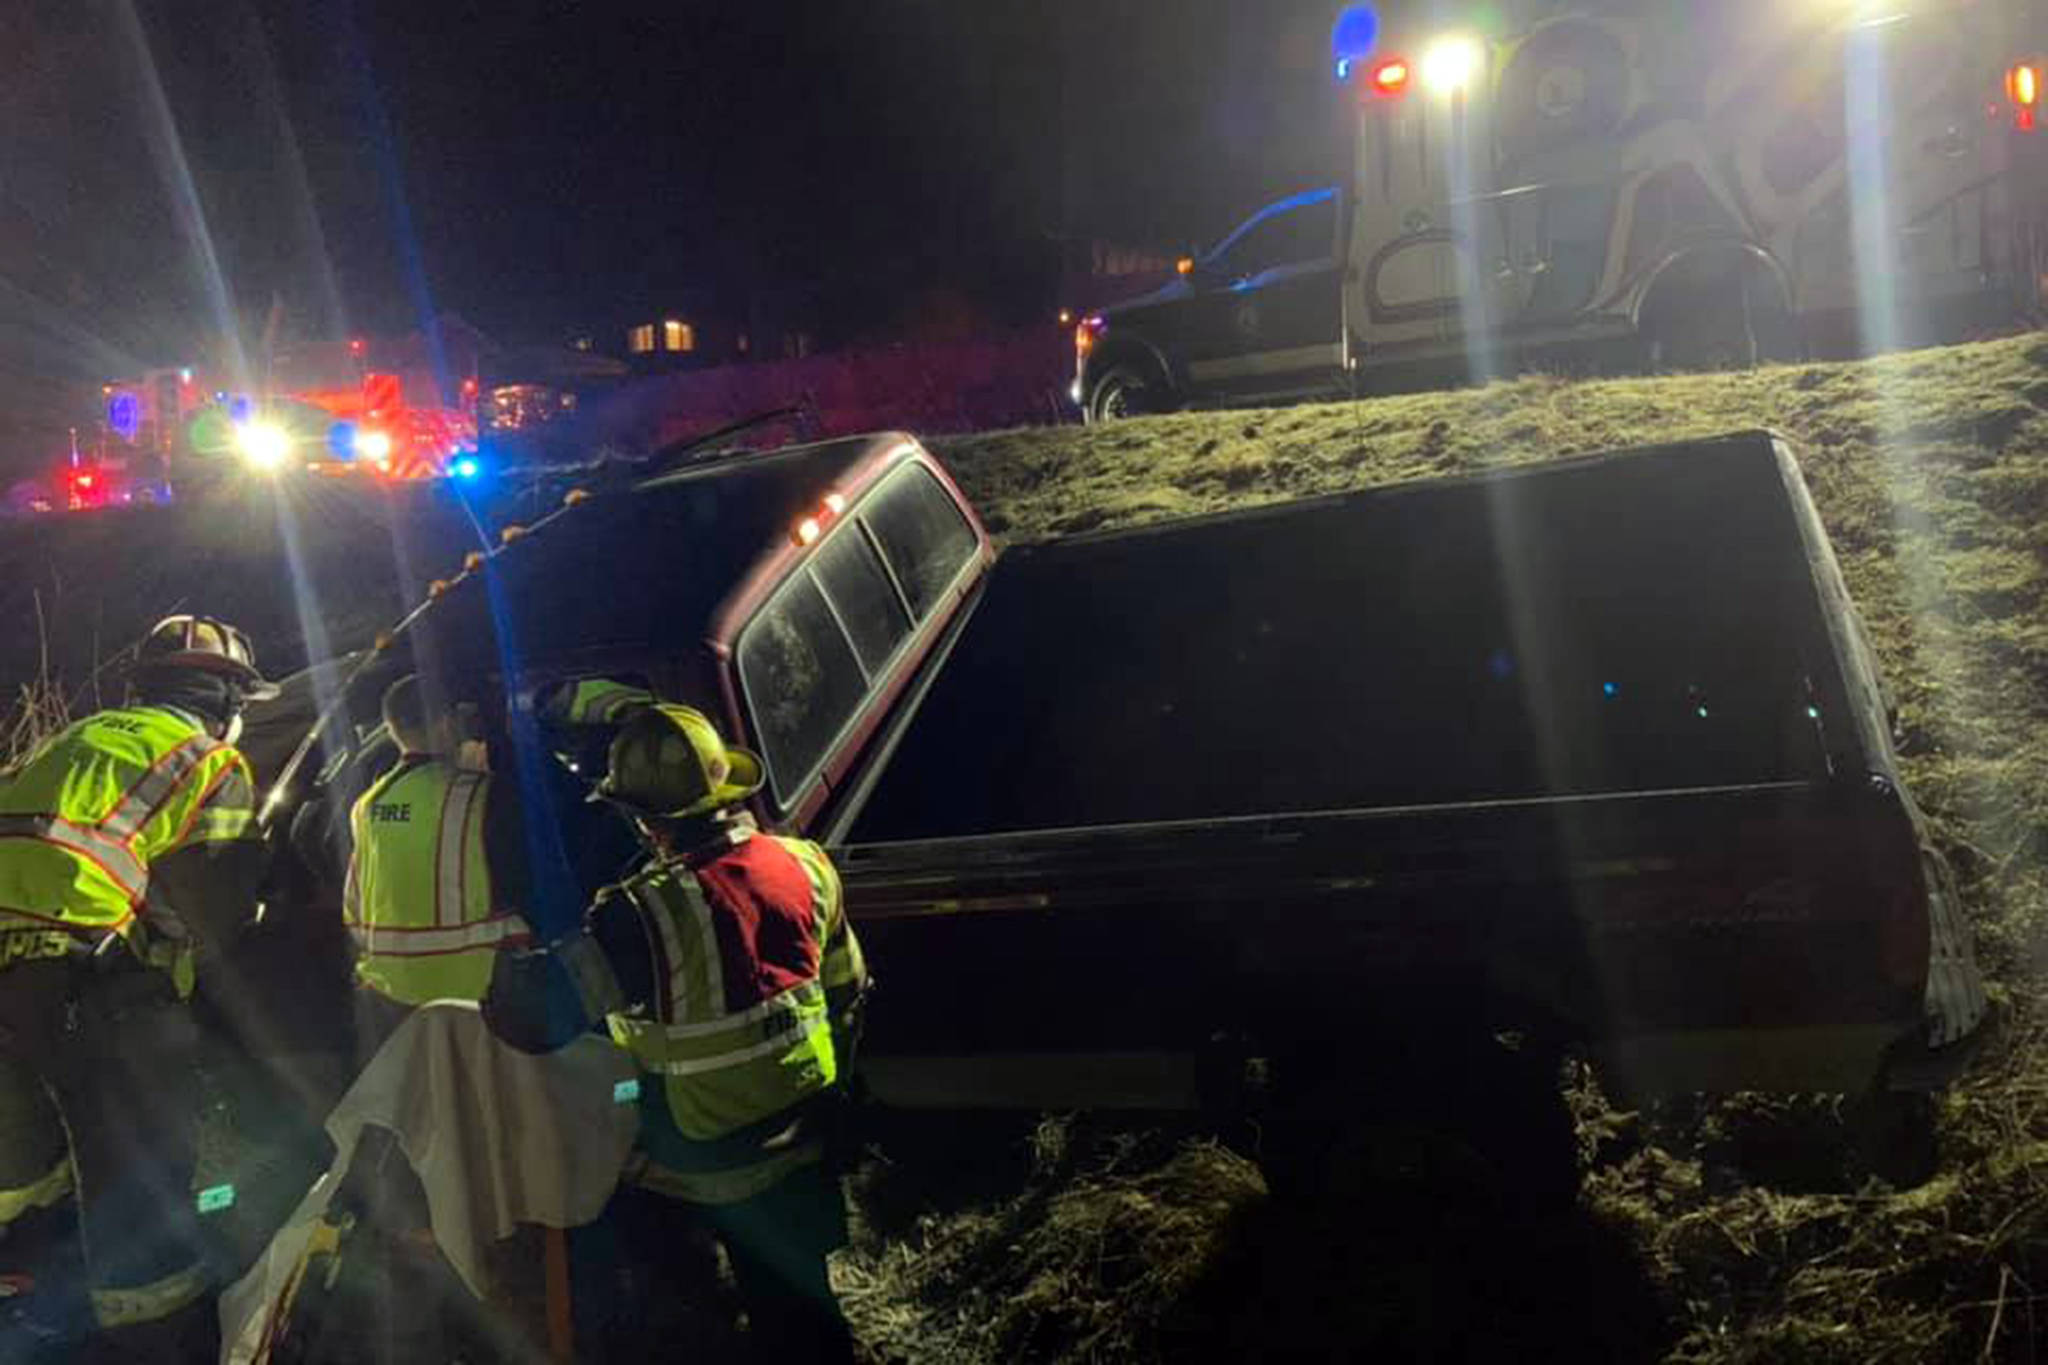 Capital City Fire/Rescue responds to a wreck in which a pickup truck slid off the road near Twin Lakes. (Courtesy Photo / CCFR)